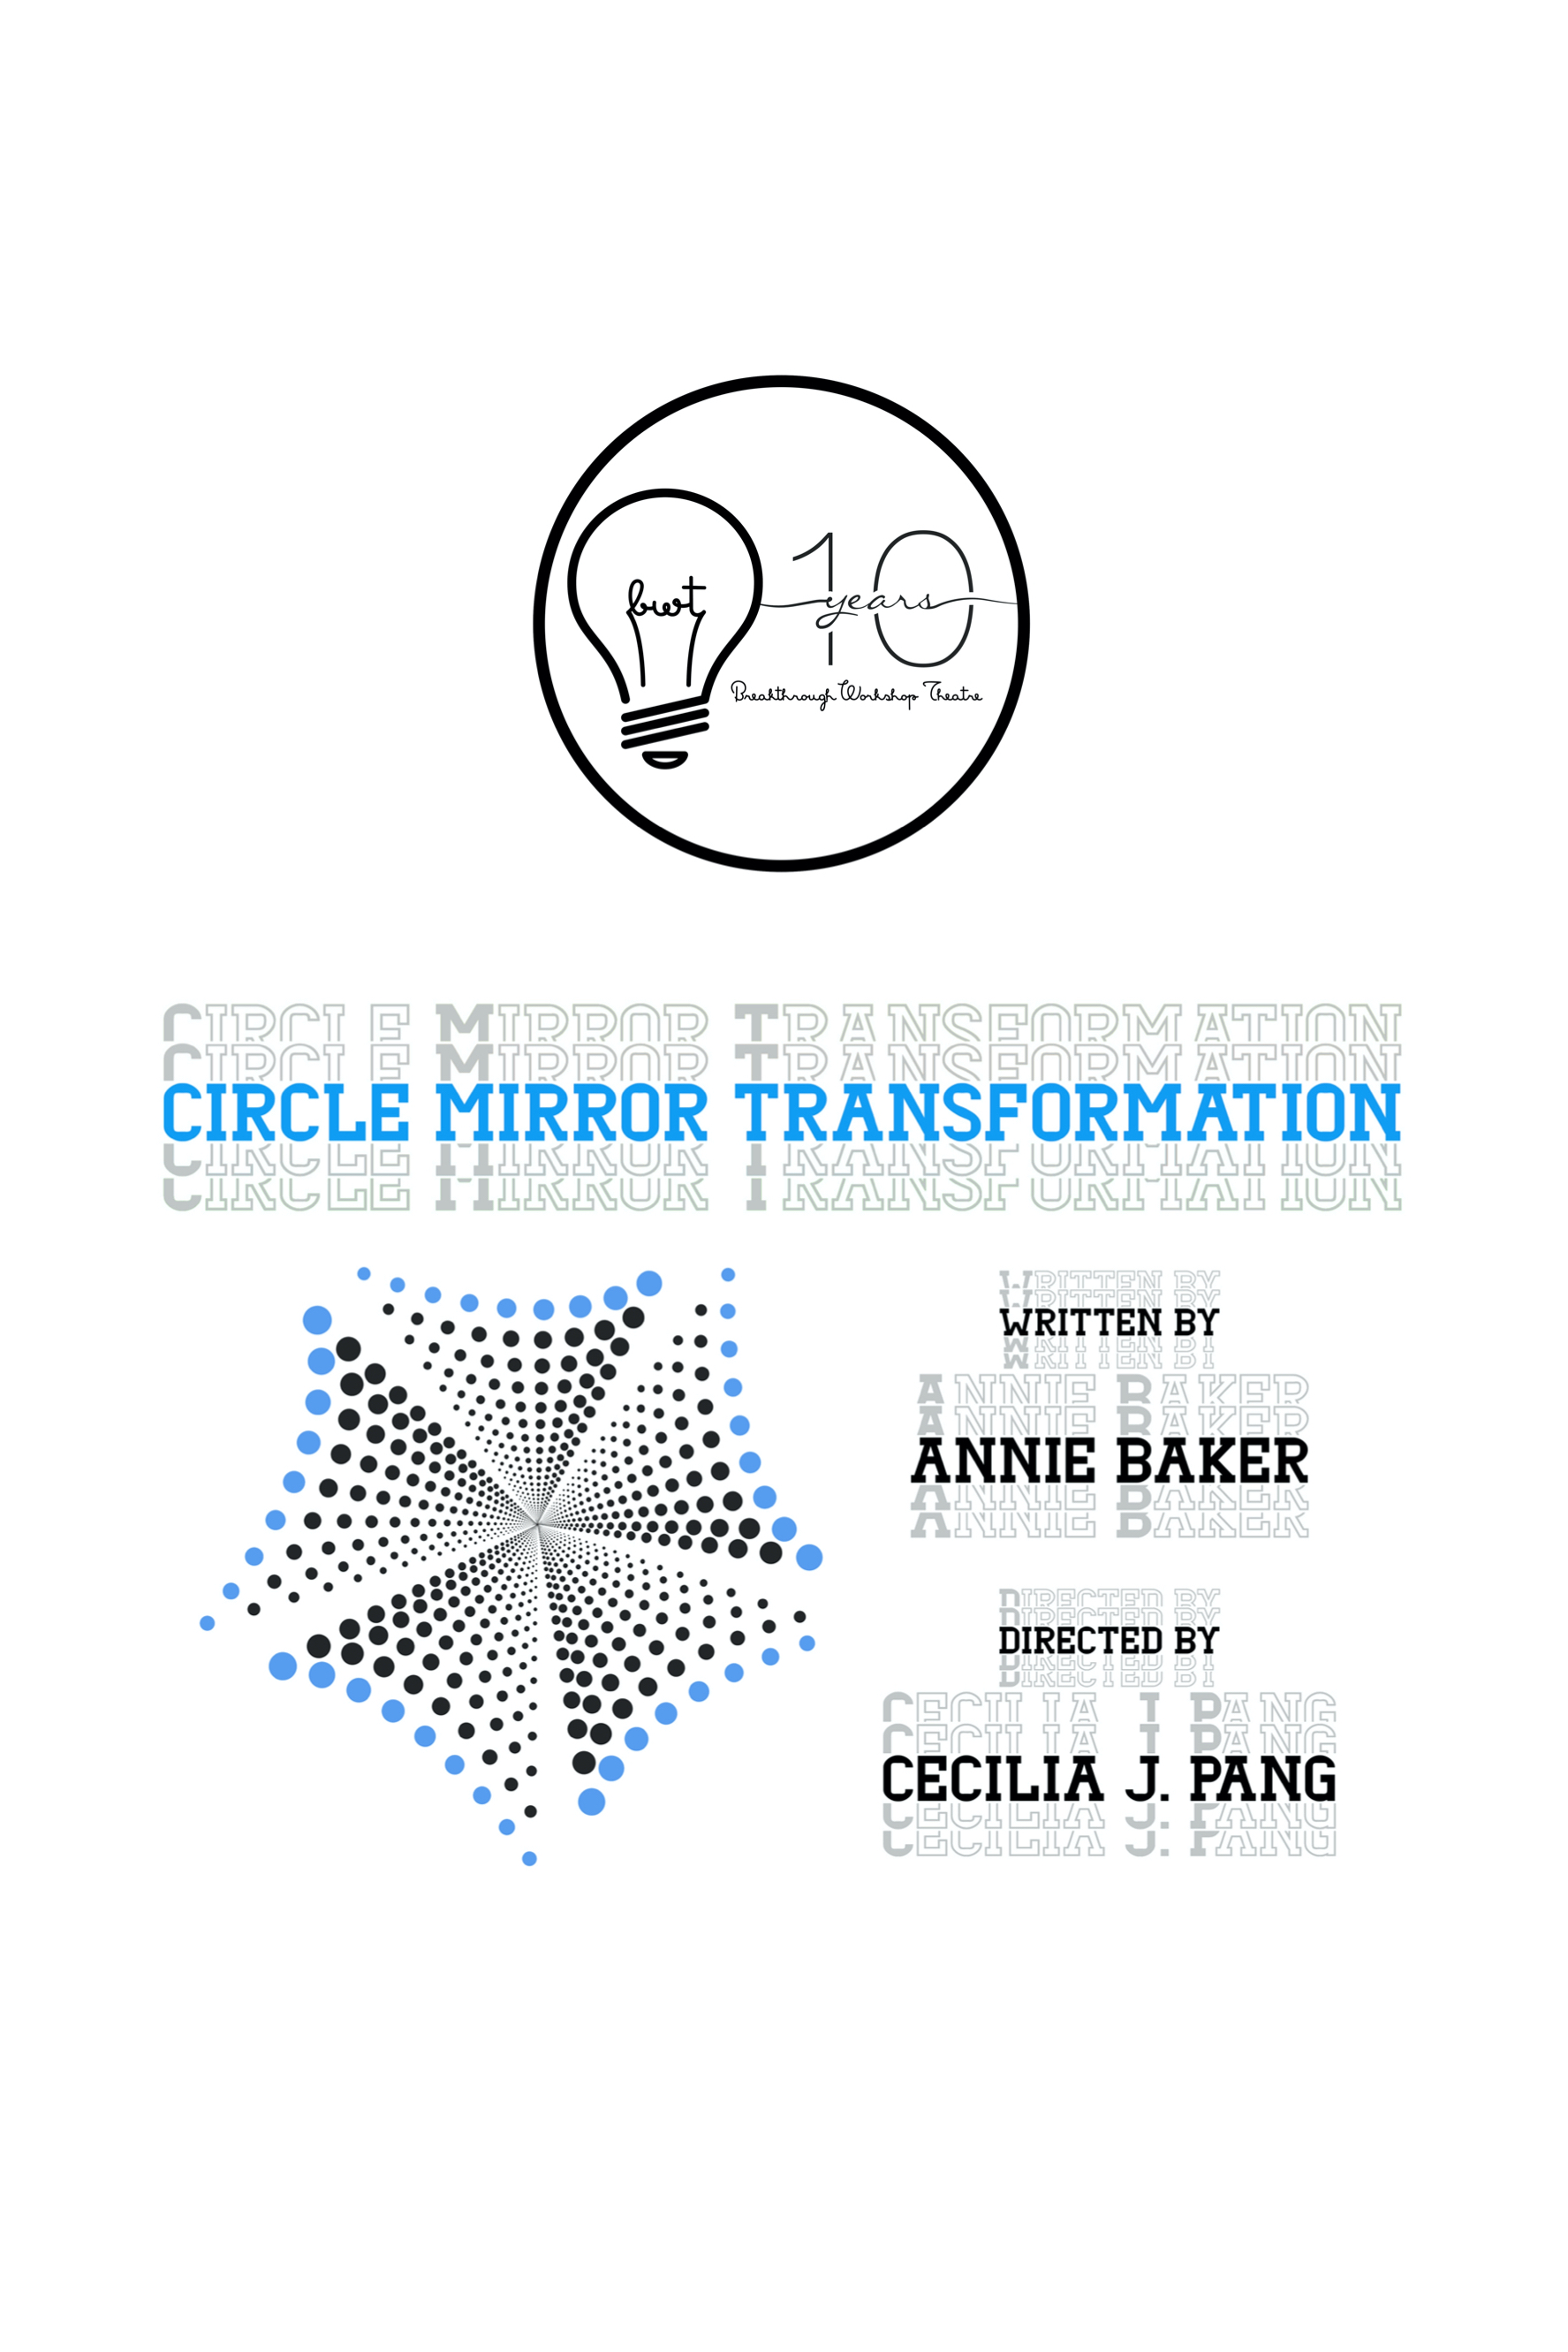 Title image for Circle Mirror Transformation